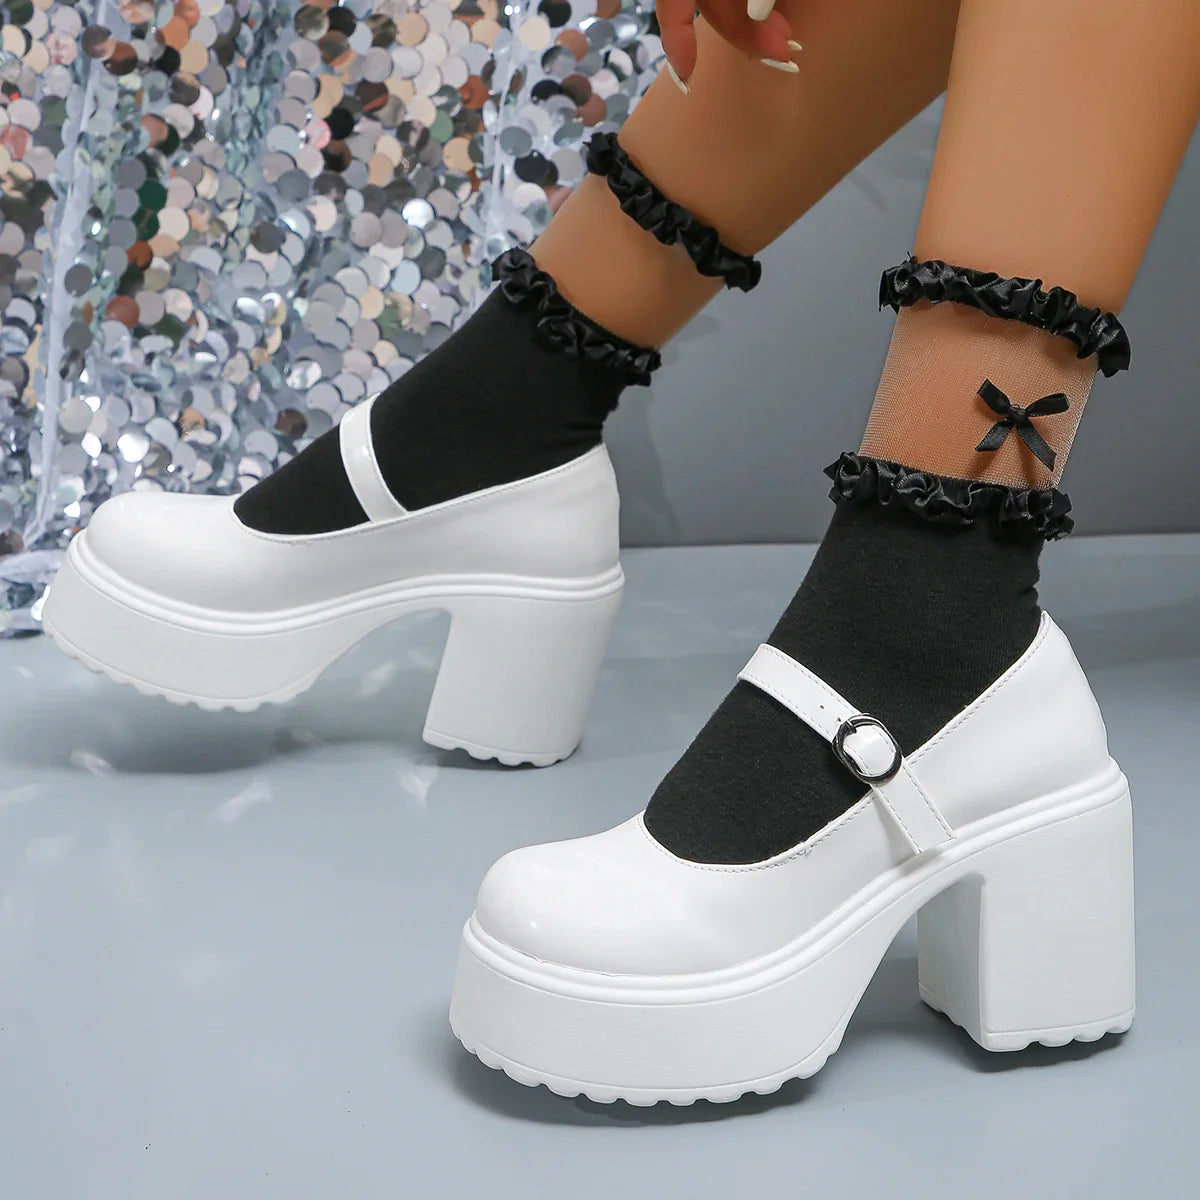 Gominglo - Gothic Elegance White Patent Leather  Super High Heels